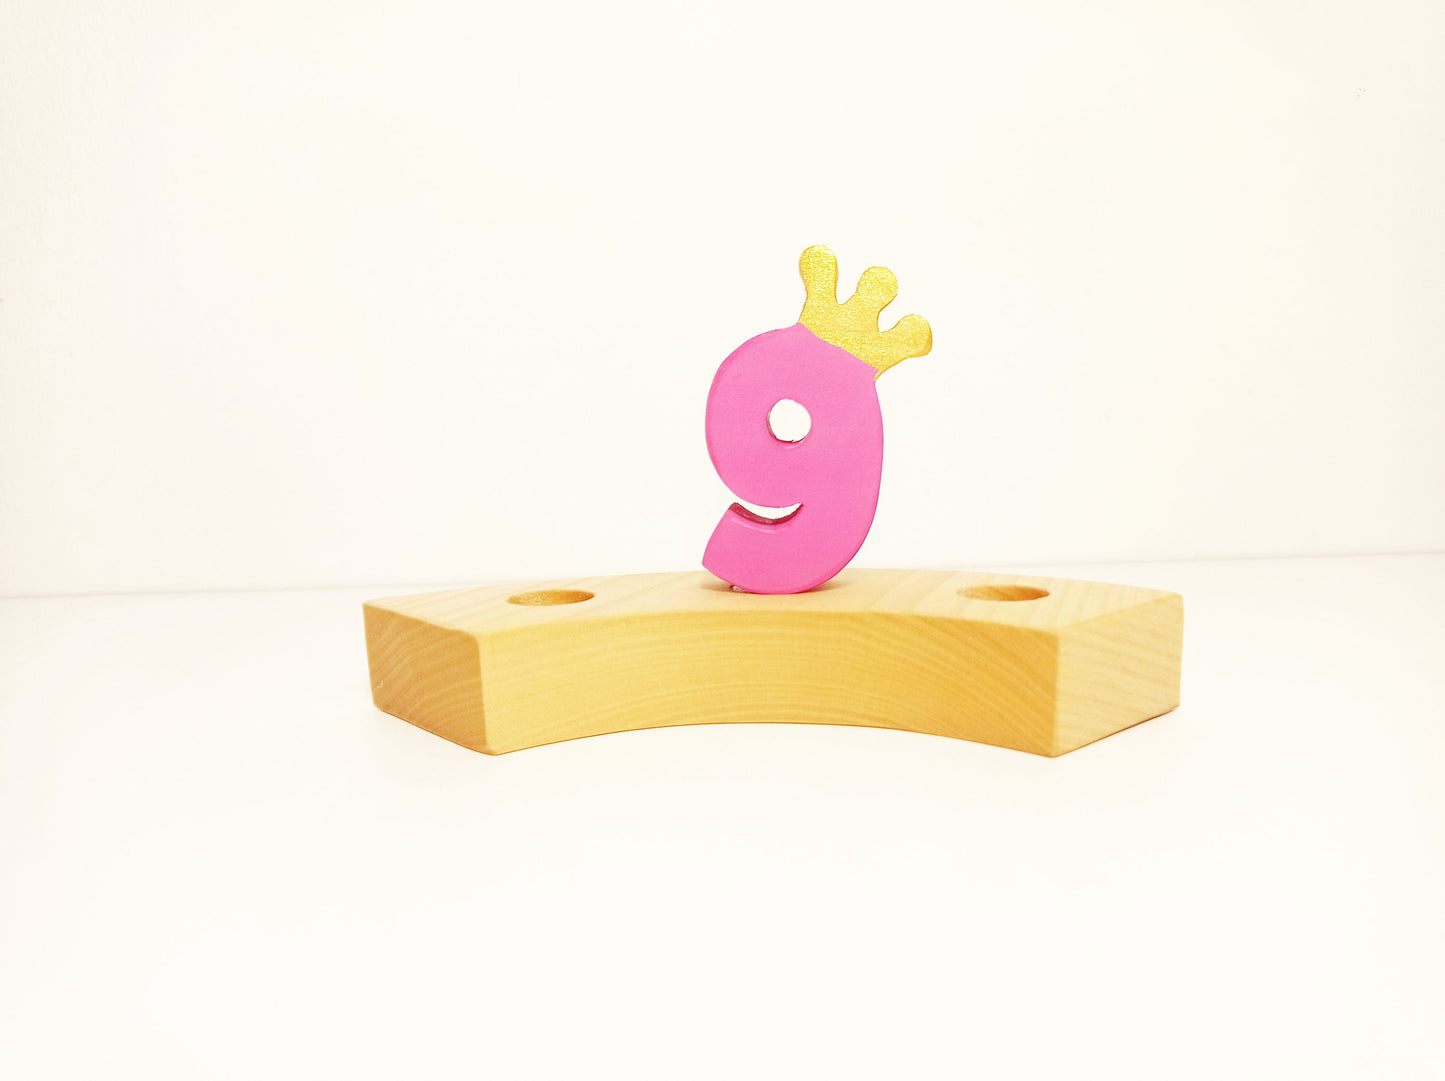 Number 9 birthday ring ornament, waldorf ring ornament, waldorf decoration, birthday ring, birthday decorations, waldorf numbers, jaar ring